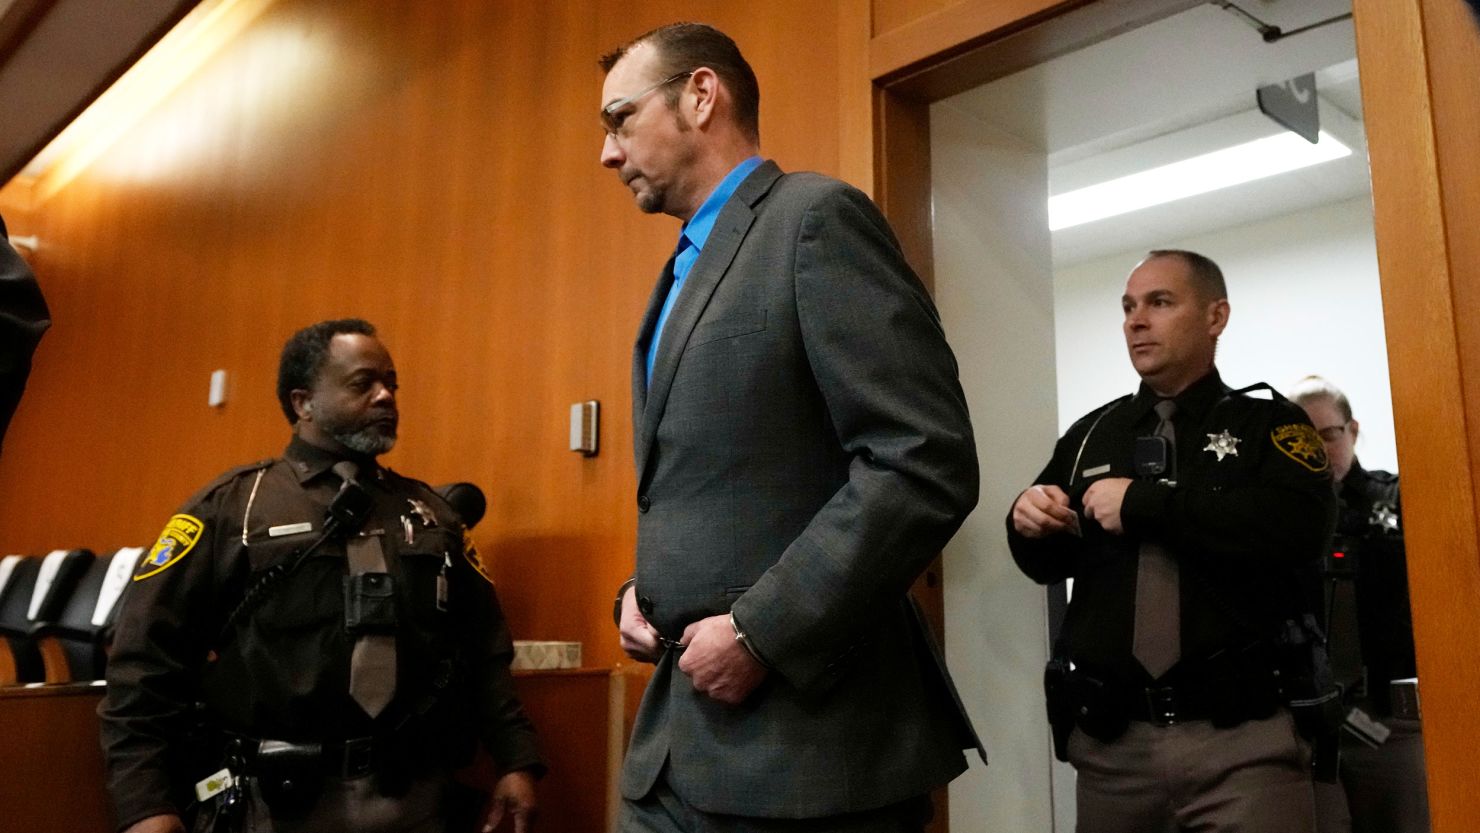 James Crumbley enters an Oakland County, Michigan, courtroom Friday. Shortly after the shooting, he told investigators the murder weapon his son used had been hidden in a case and the bullets were stored separately, according to testimony.